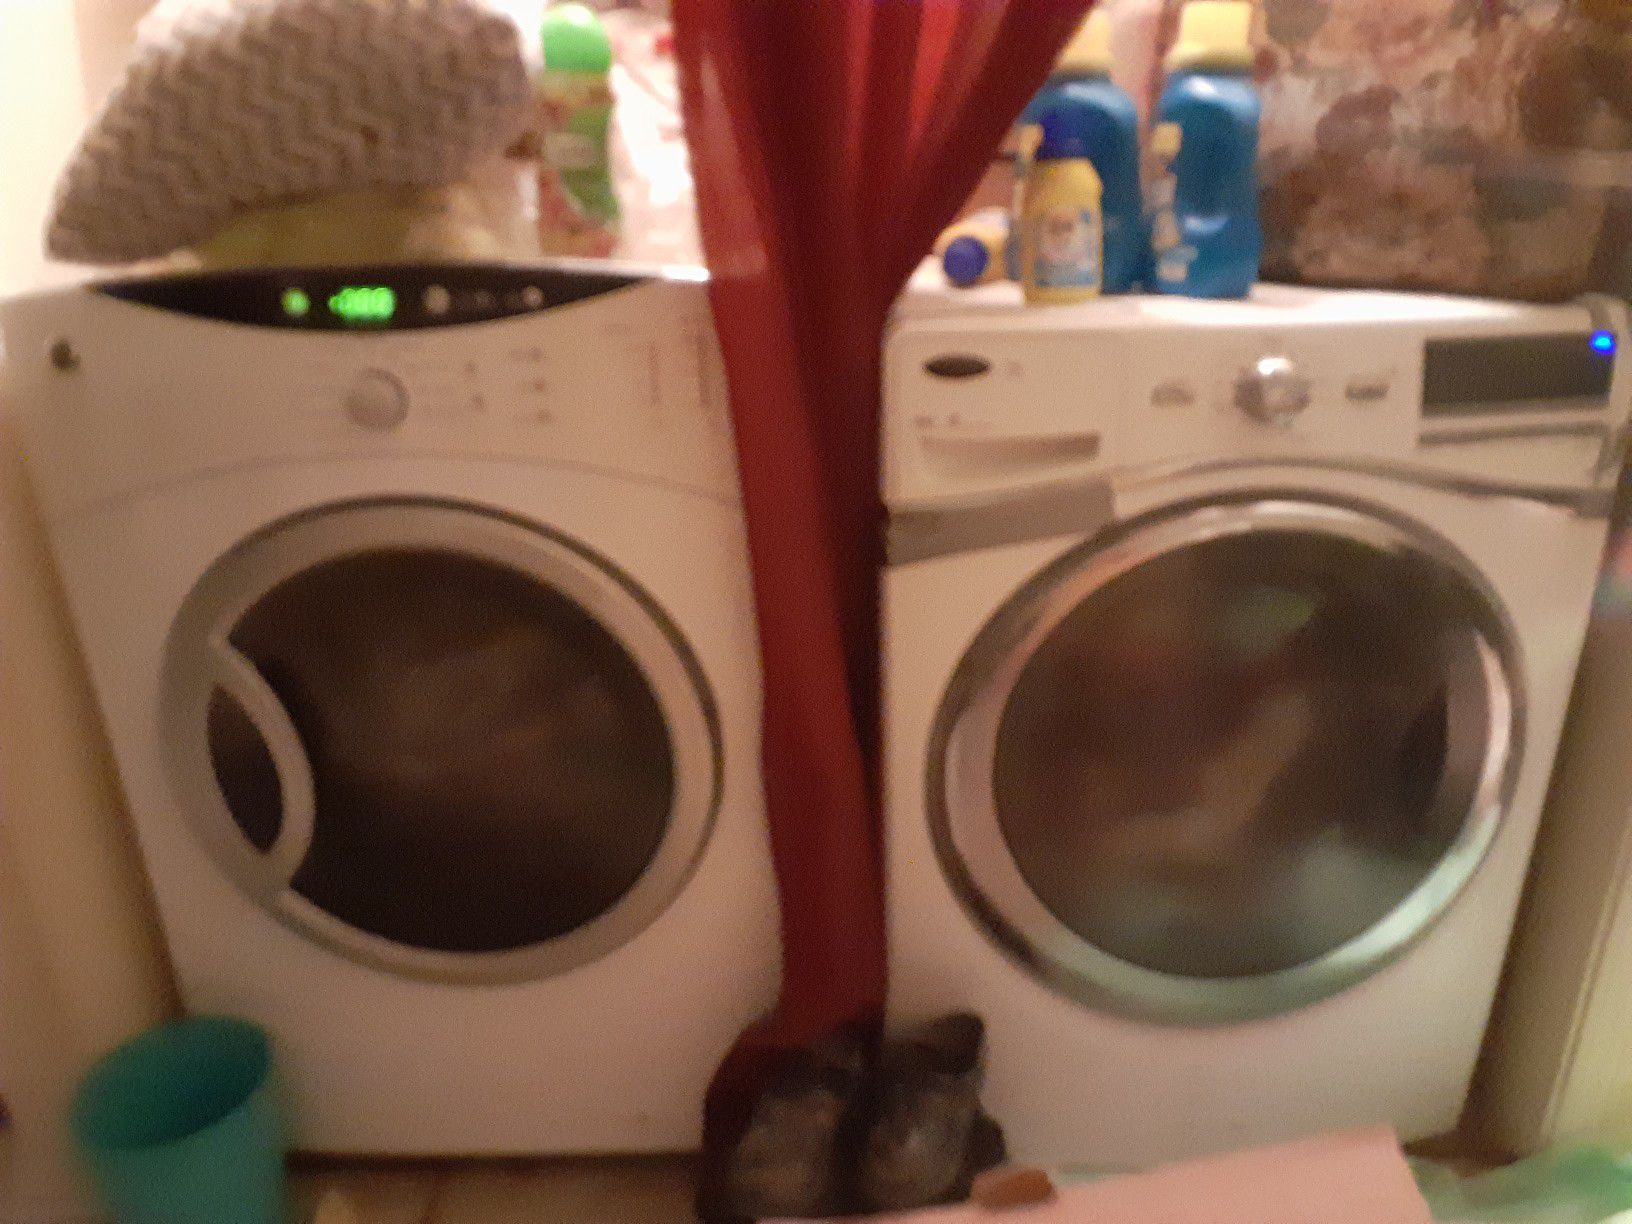 Set front loaders washer and dryer whirlpool